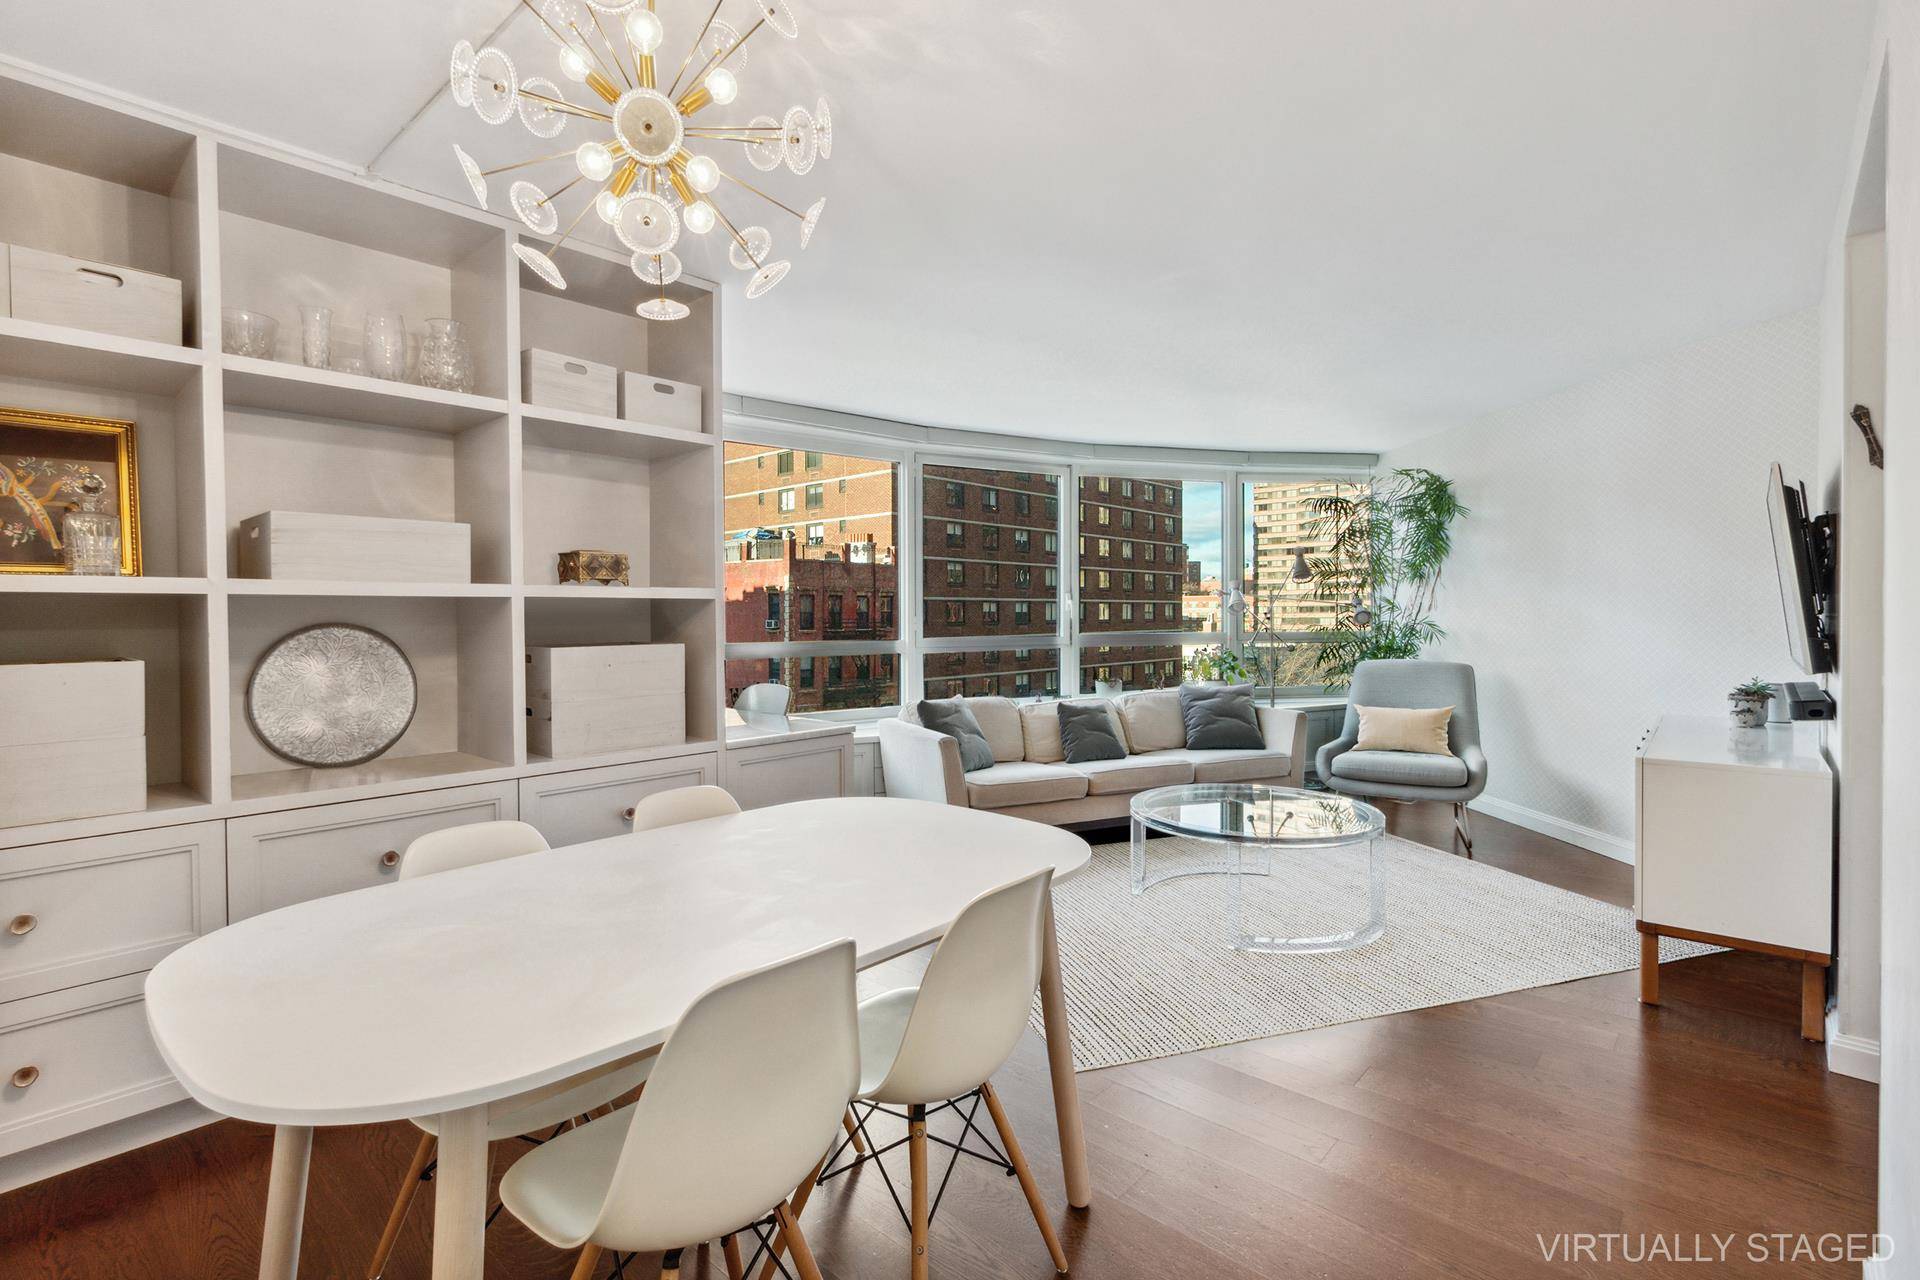 Welcome home to this two bedroom, two bathroom home and experience modern luxury living at the Carnegie Park Condominium.